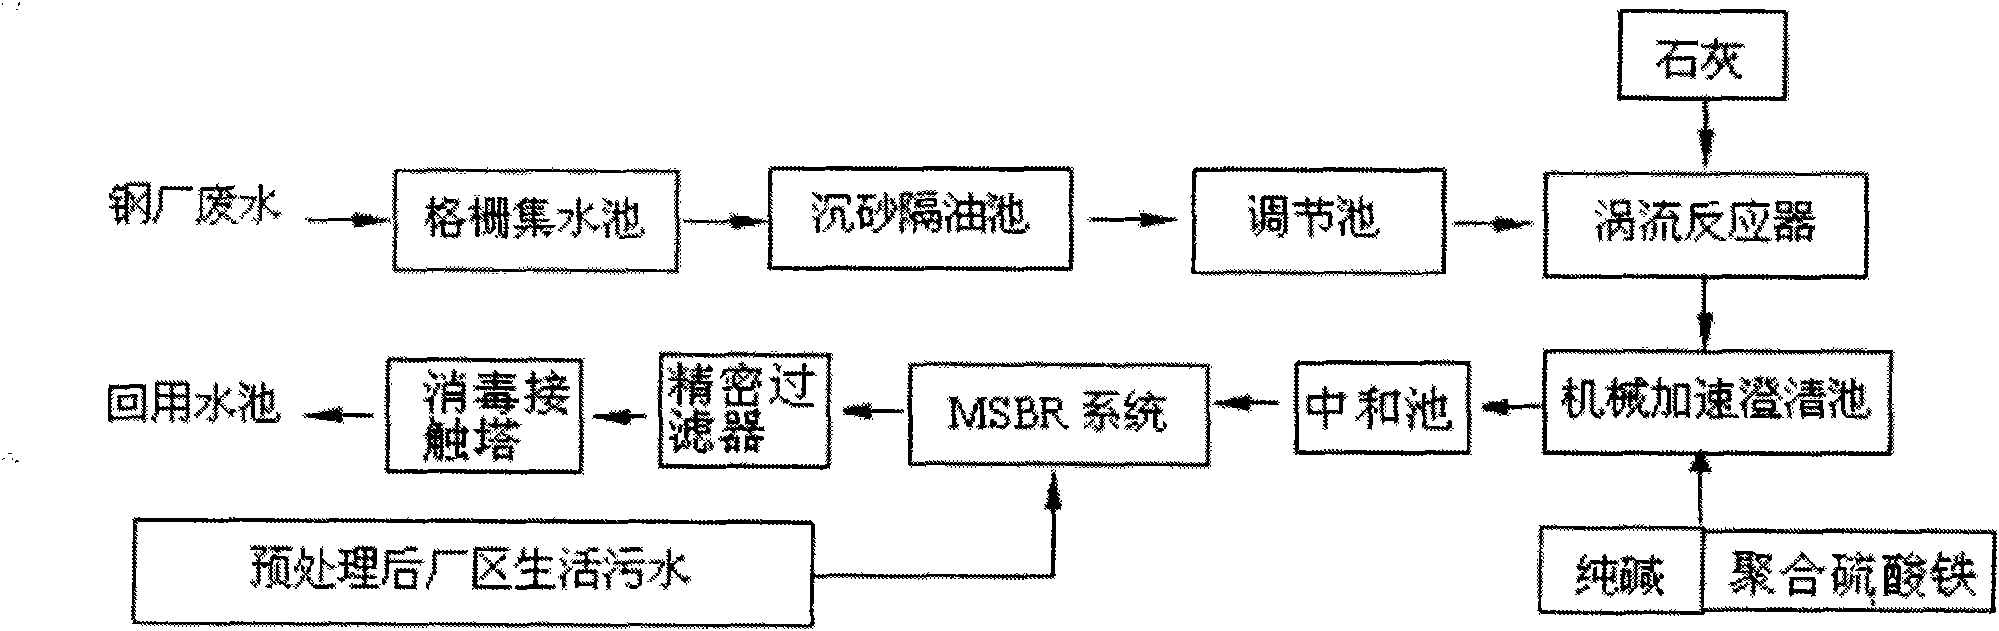 Method for treating and recycling waste water of steel plants